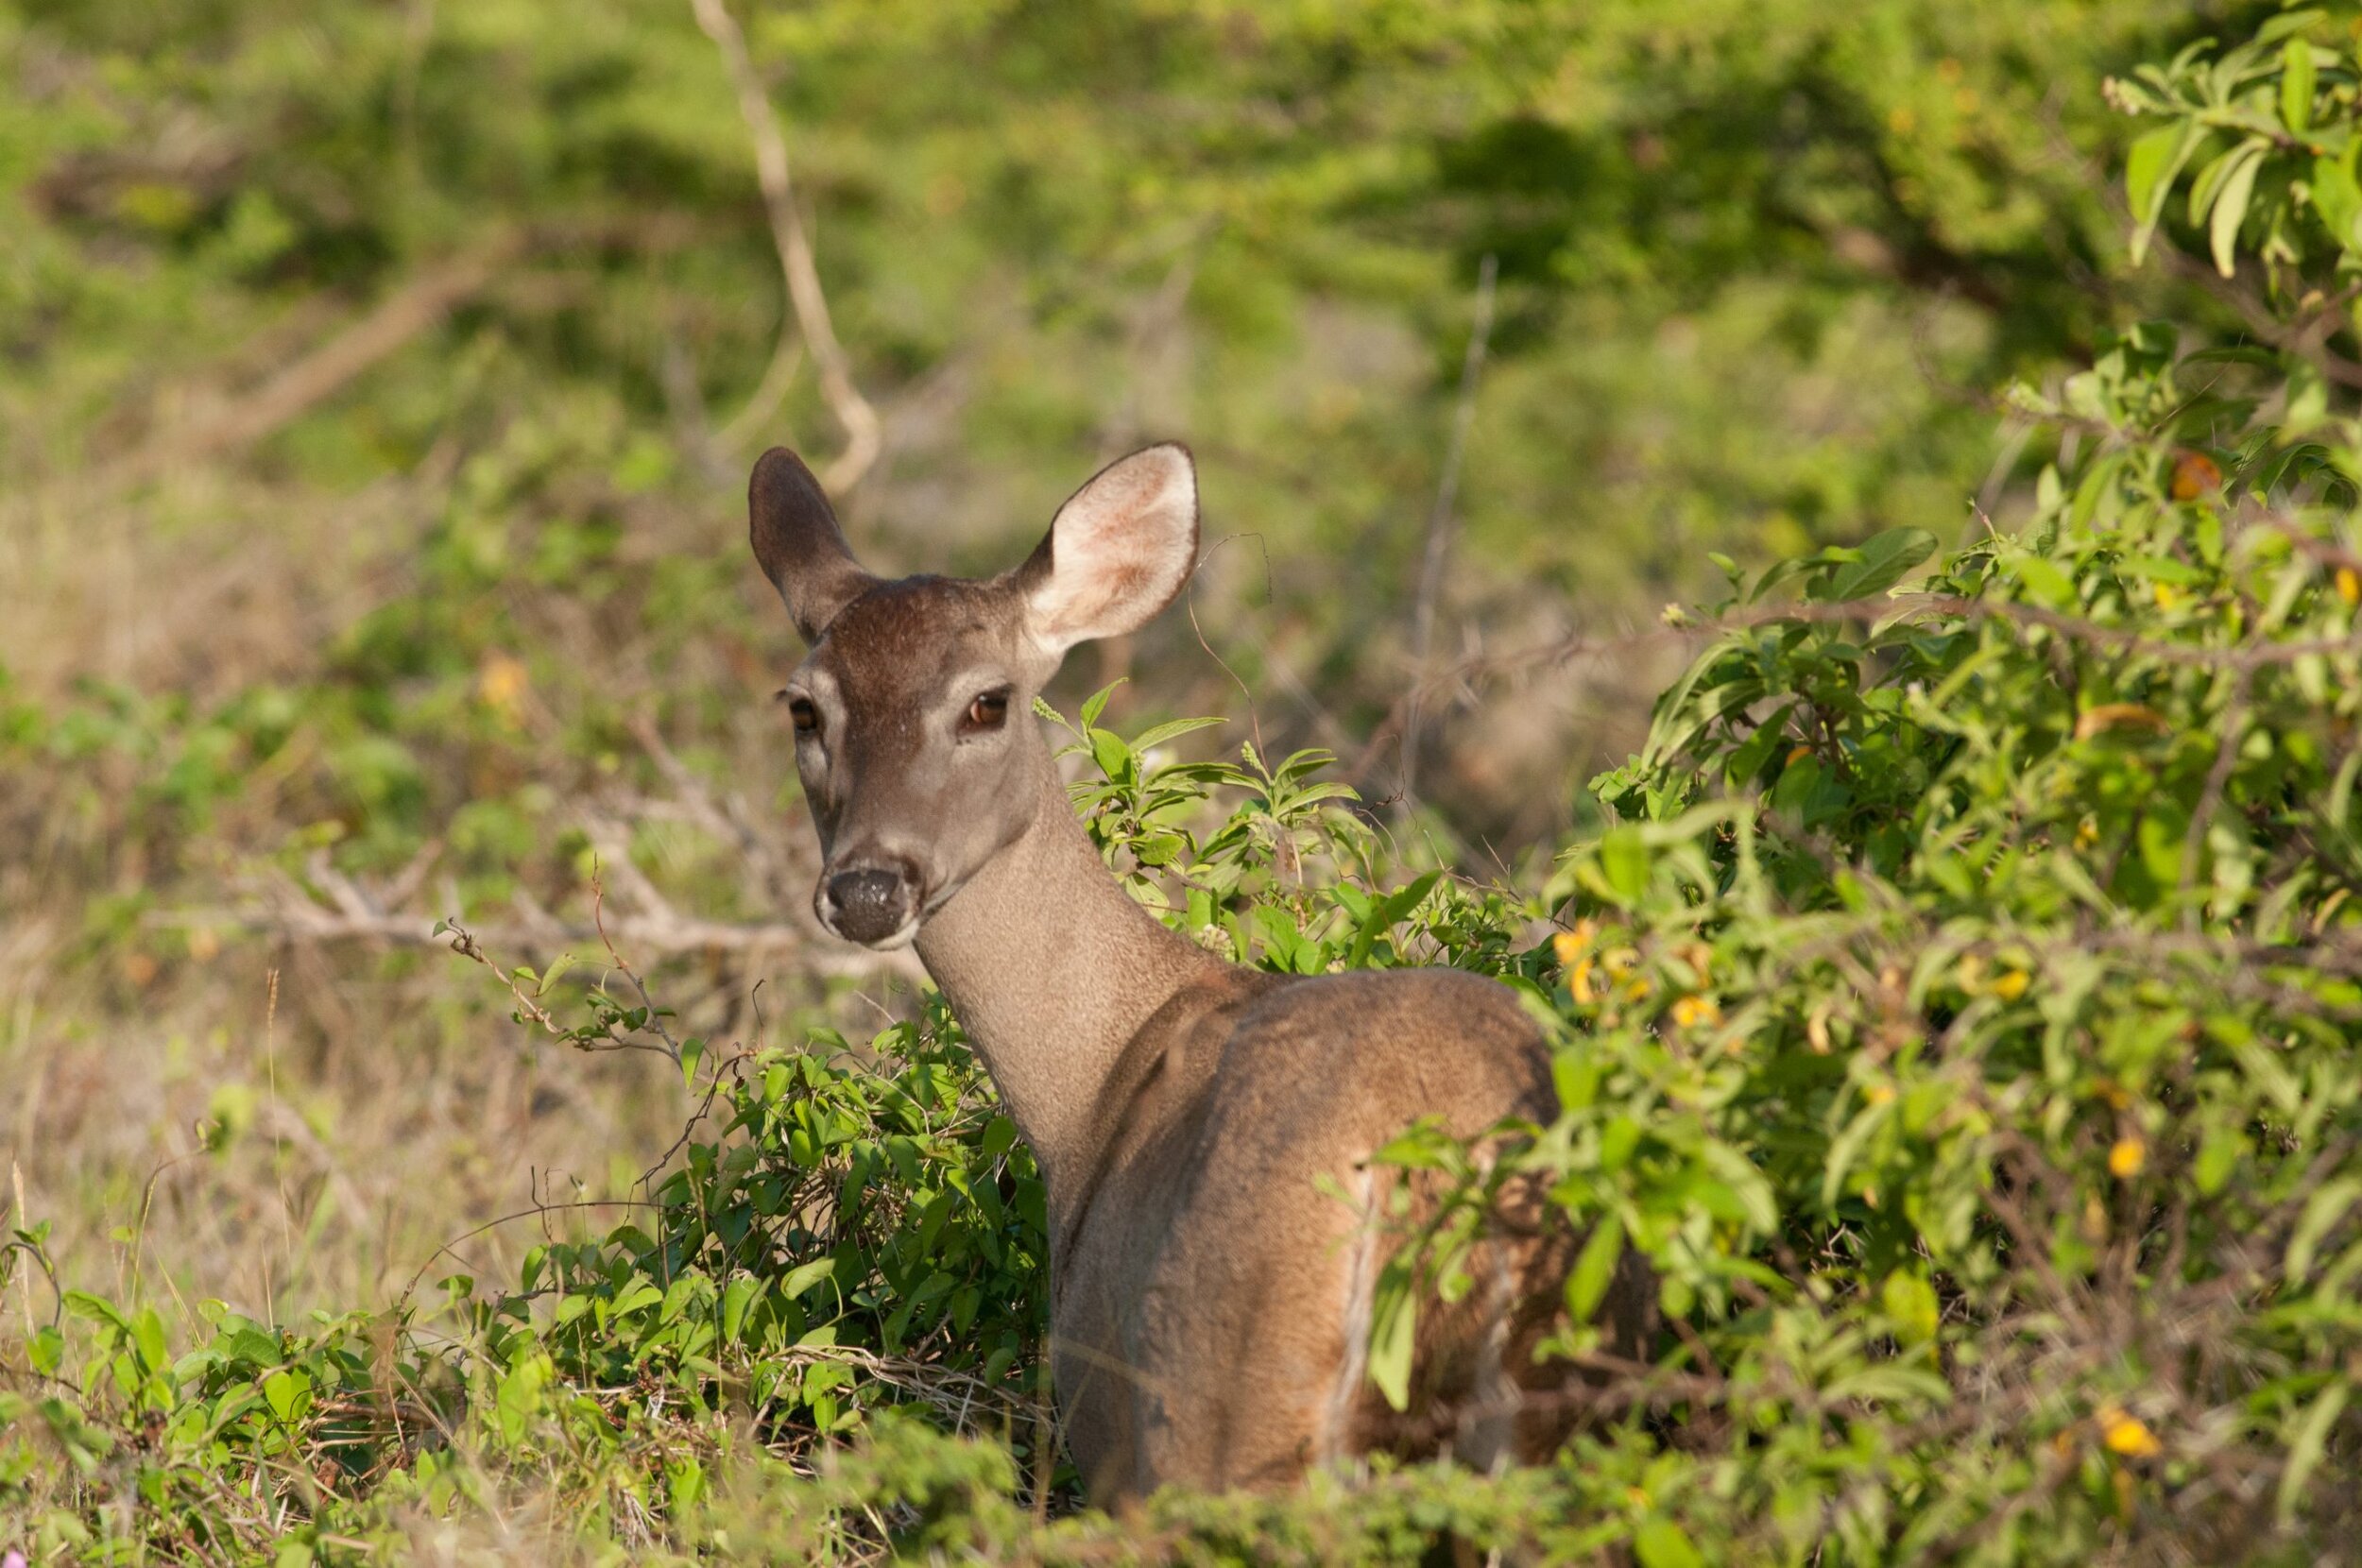 Curacao’s white-tailed deer